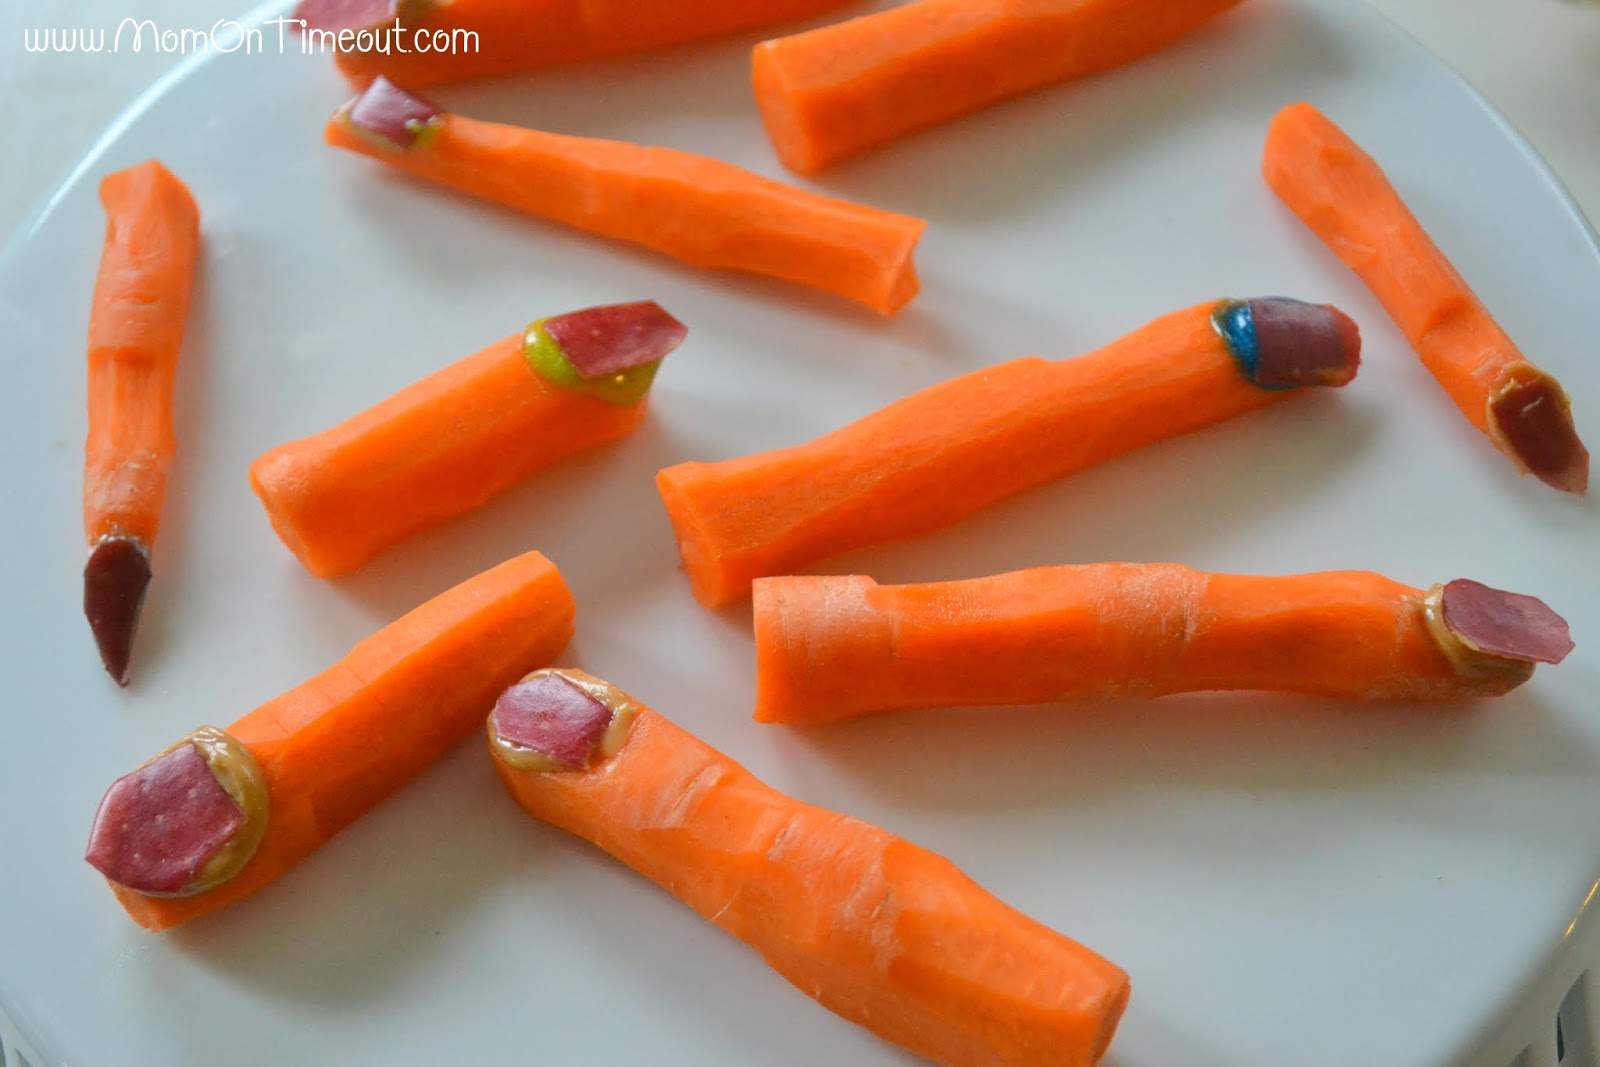 Healthy Halloween Snack: Witch Fingers {Recipe} - Mom On Timeout